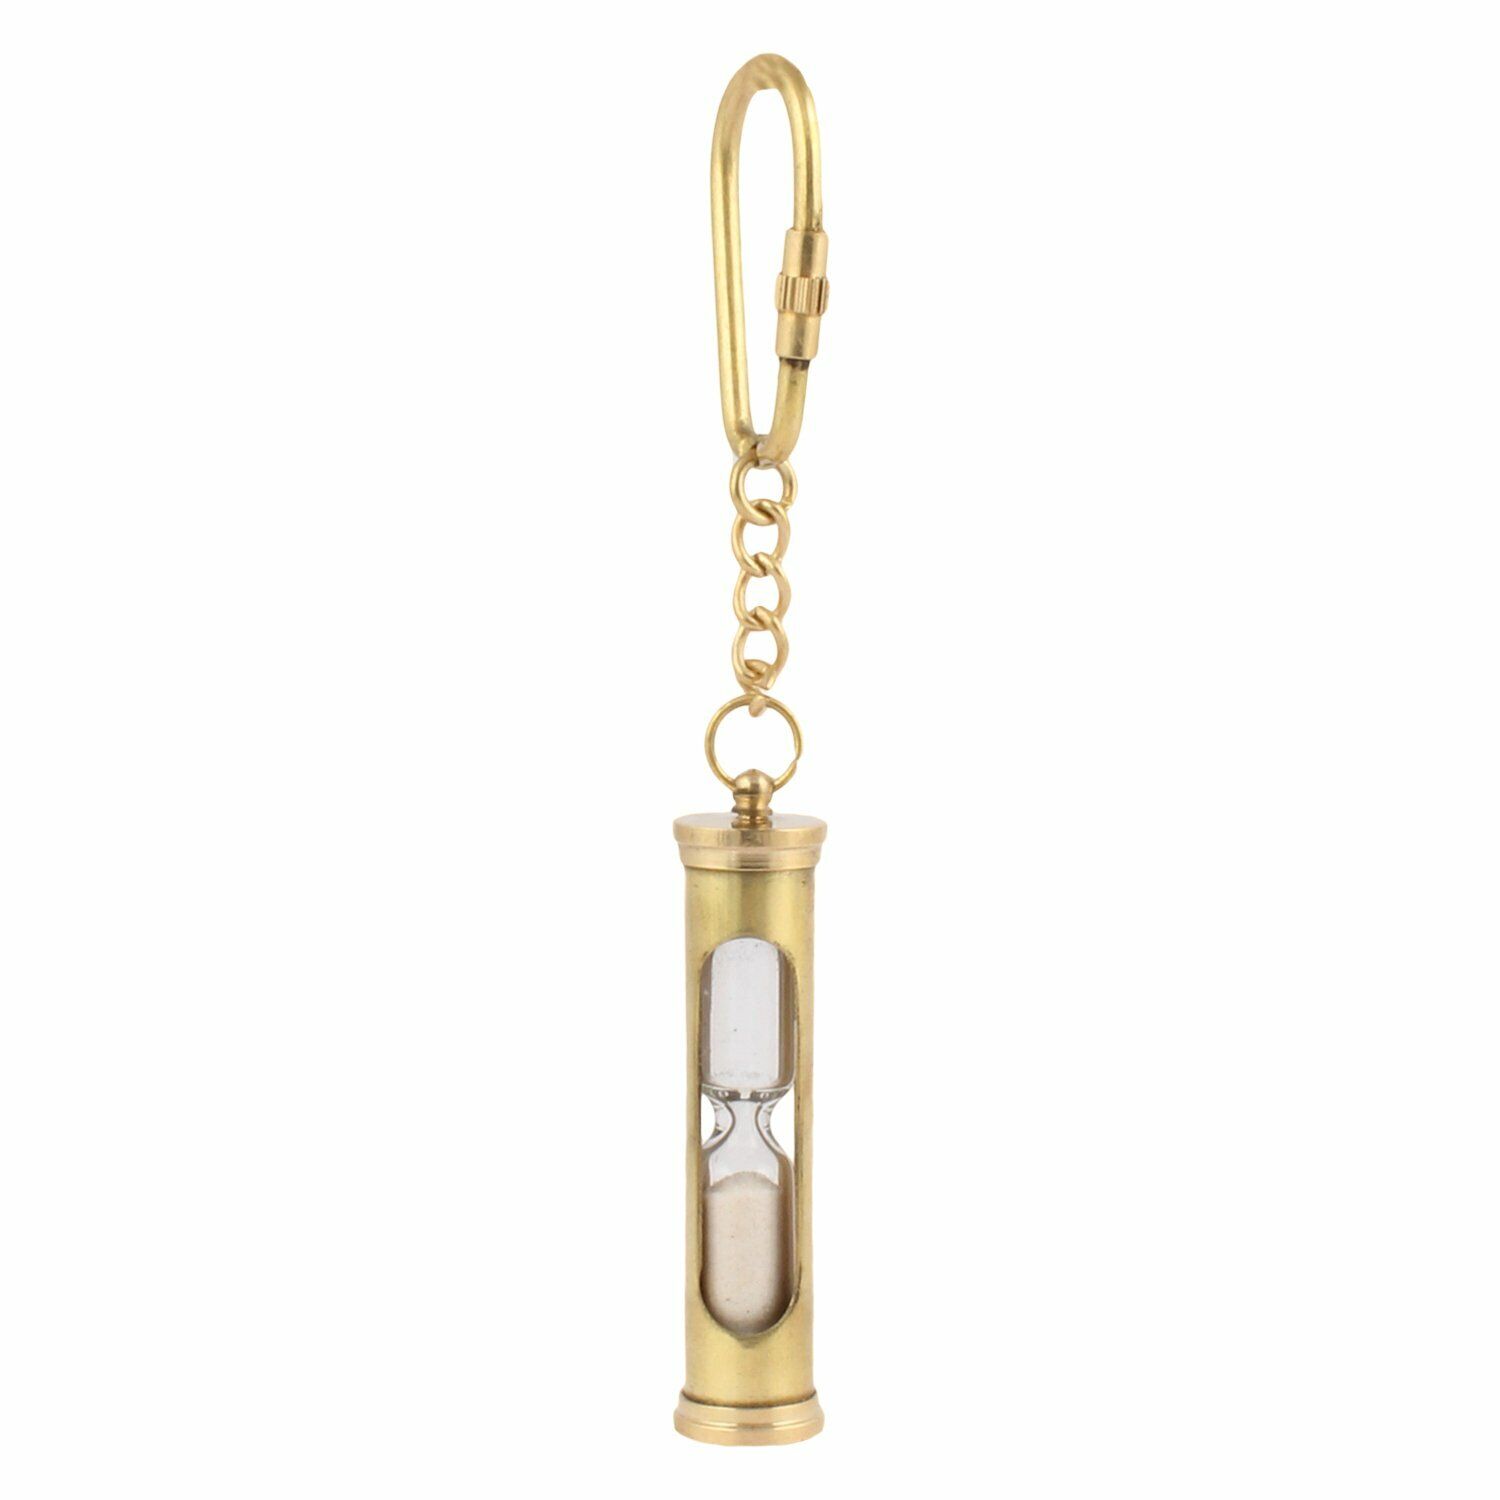 Antique Style Hourglass Keychain Made From Pure Brass  Worldwide